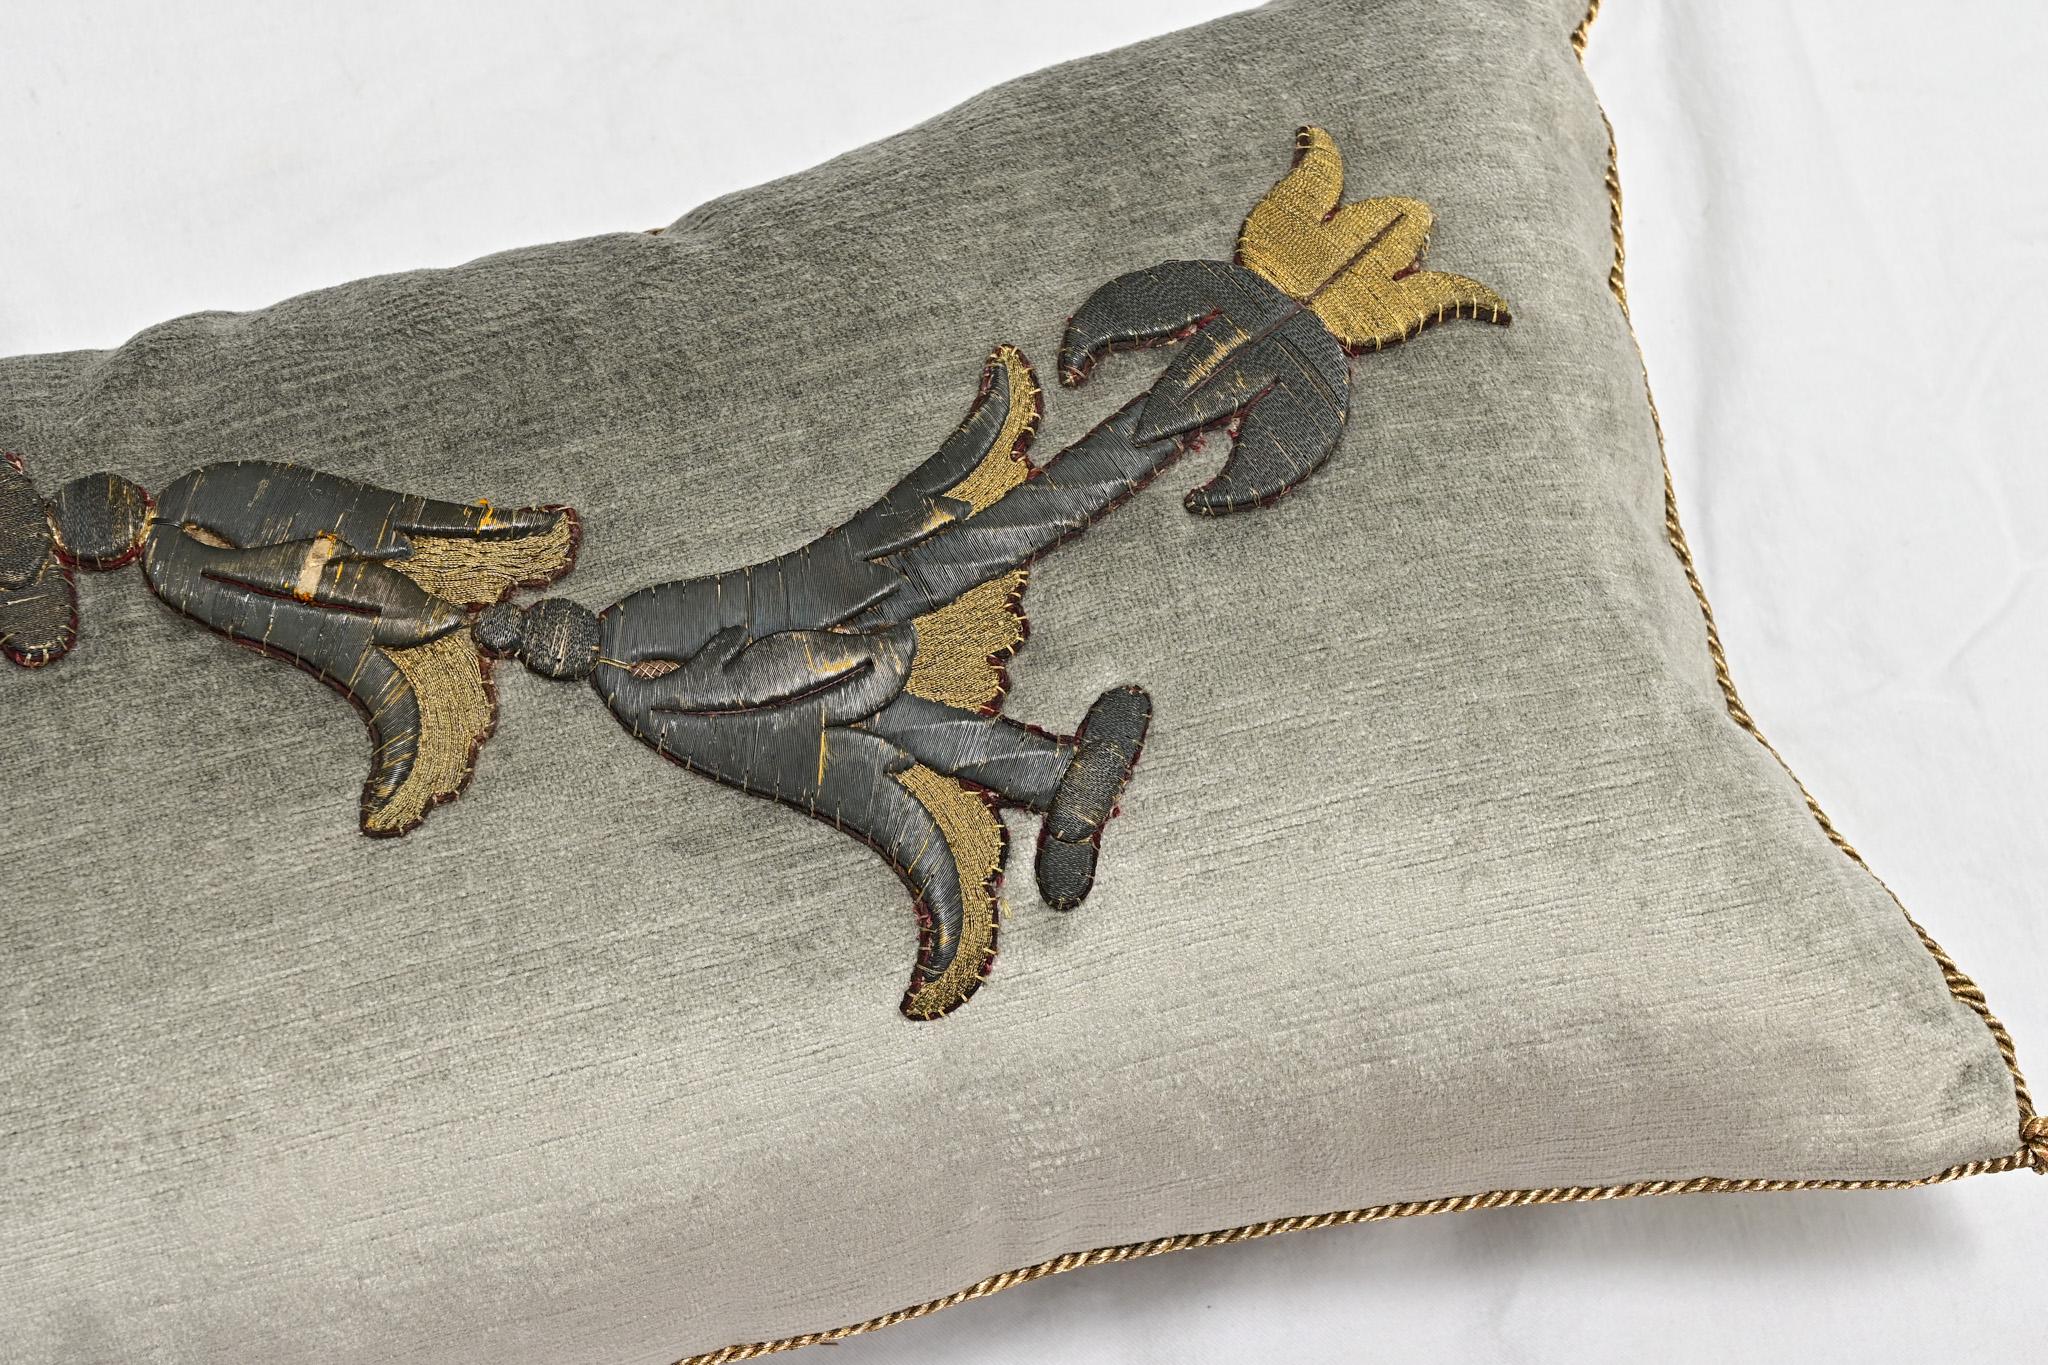 B. Viz Raised Antique Embroidery Pillow In Good Condition For Sale In Baton Rouge, LA